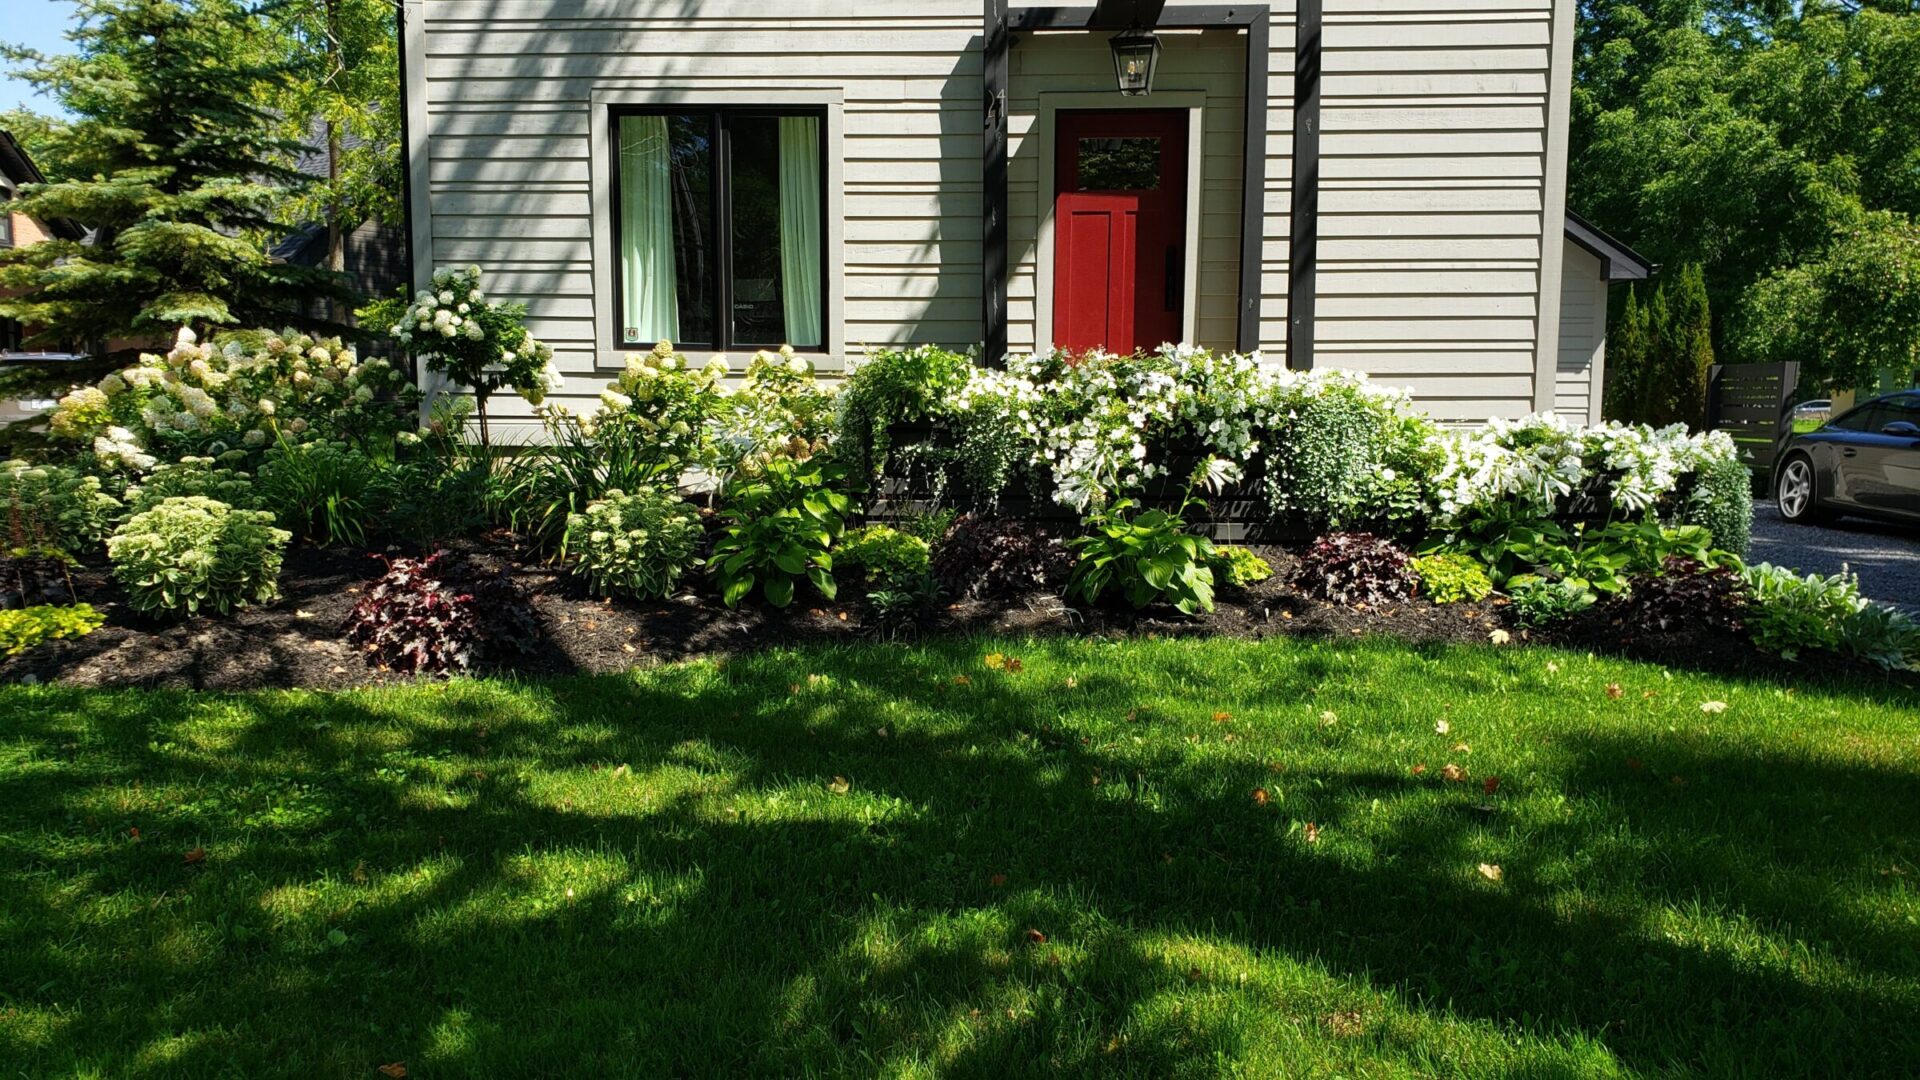 This image shows a well-maintained garden in front of a house with a red door, lush greenery, flowering shrubs, and a clear blue sky.